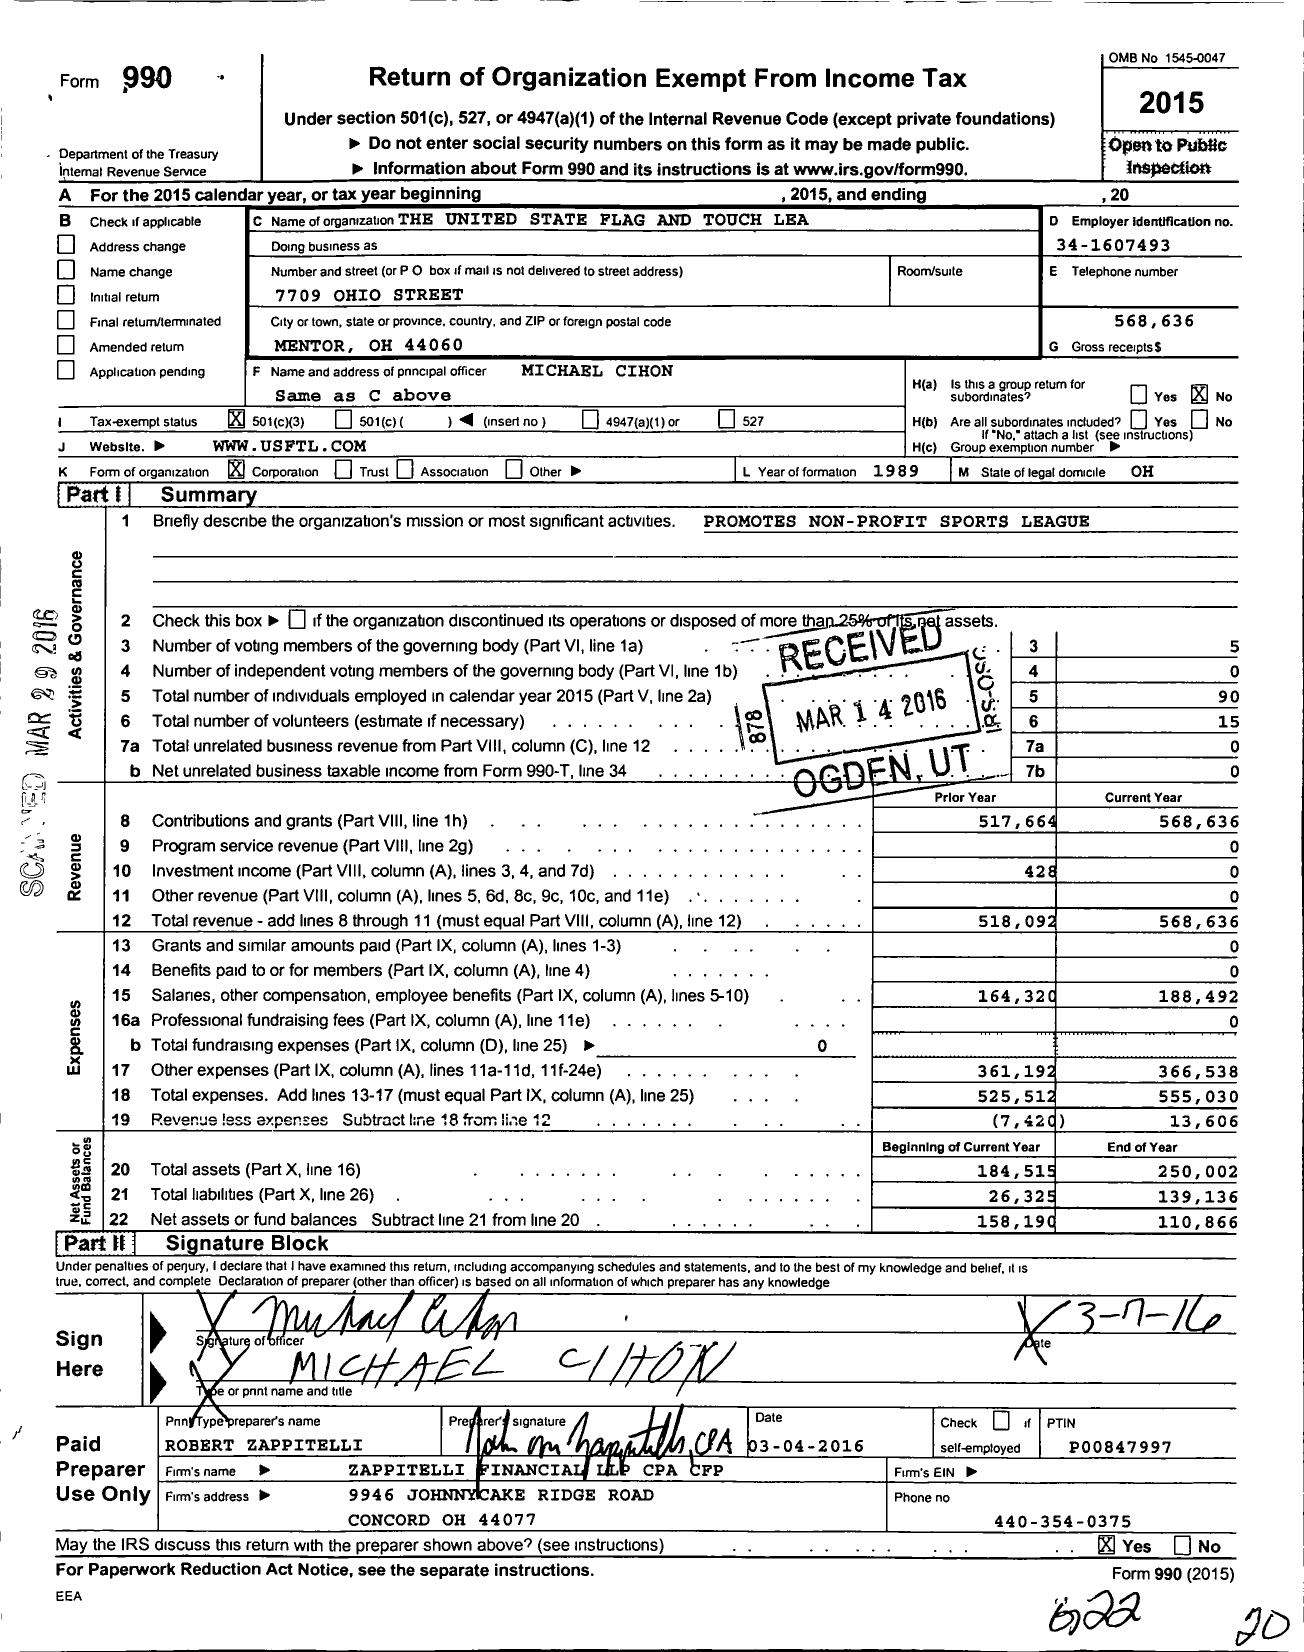 Image of first page of 2015 Form 990 for United State Flag and Touch Lea